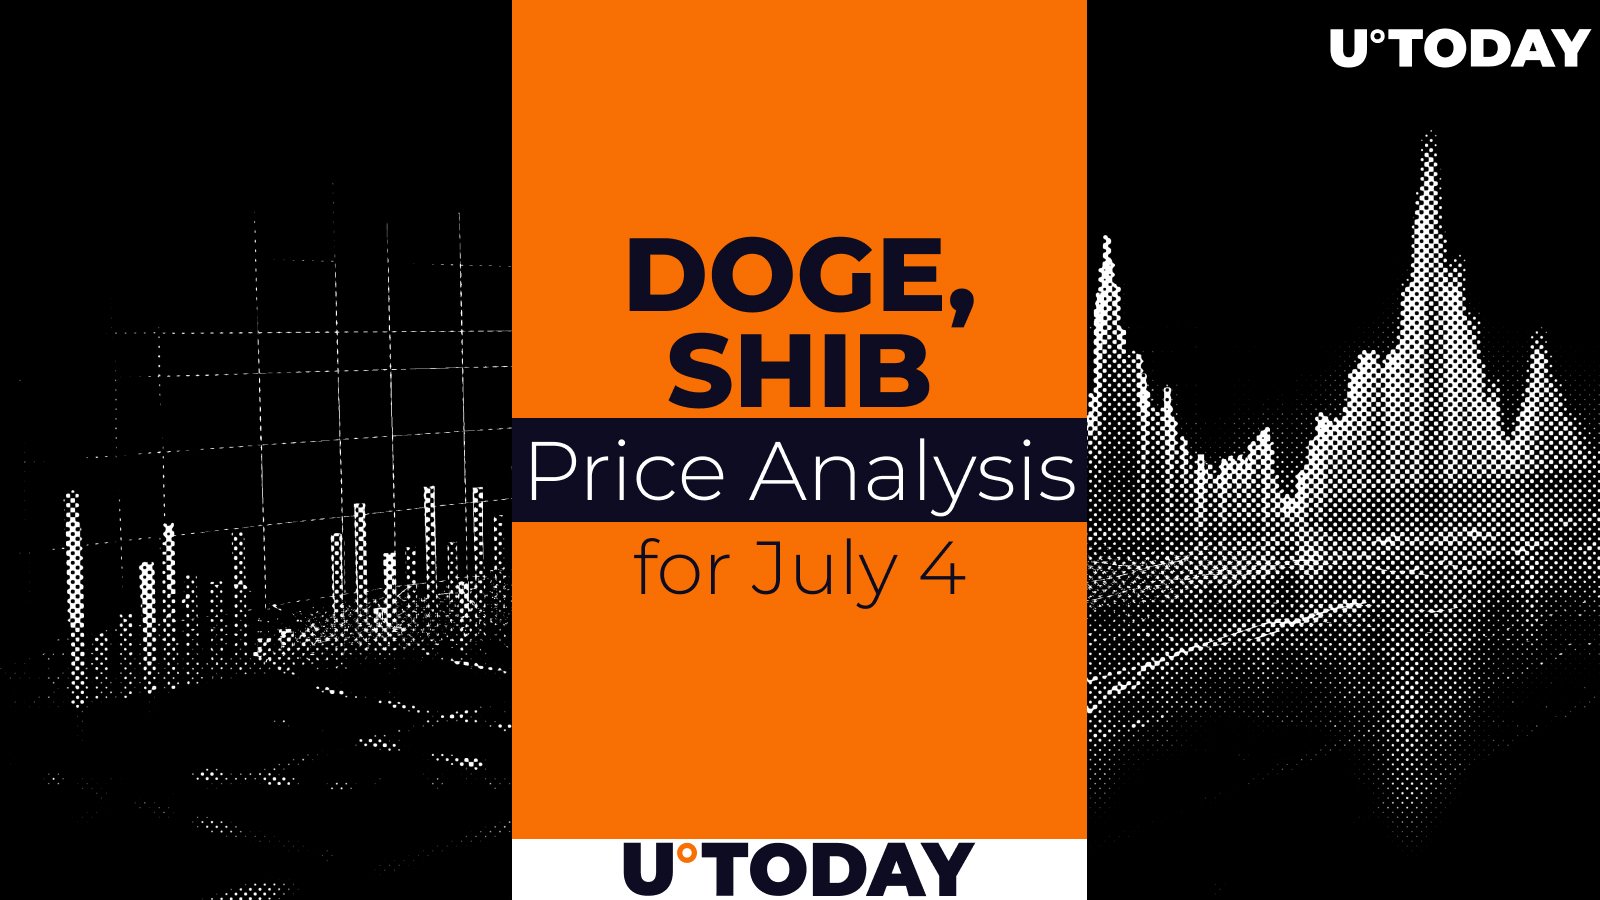 DOGE and SHIB Price Prediction for July 4